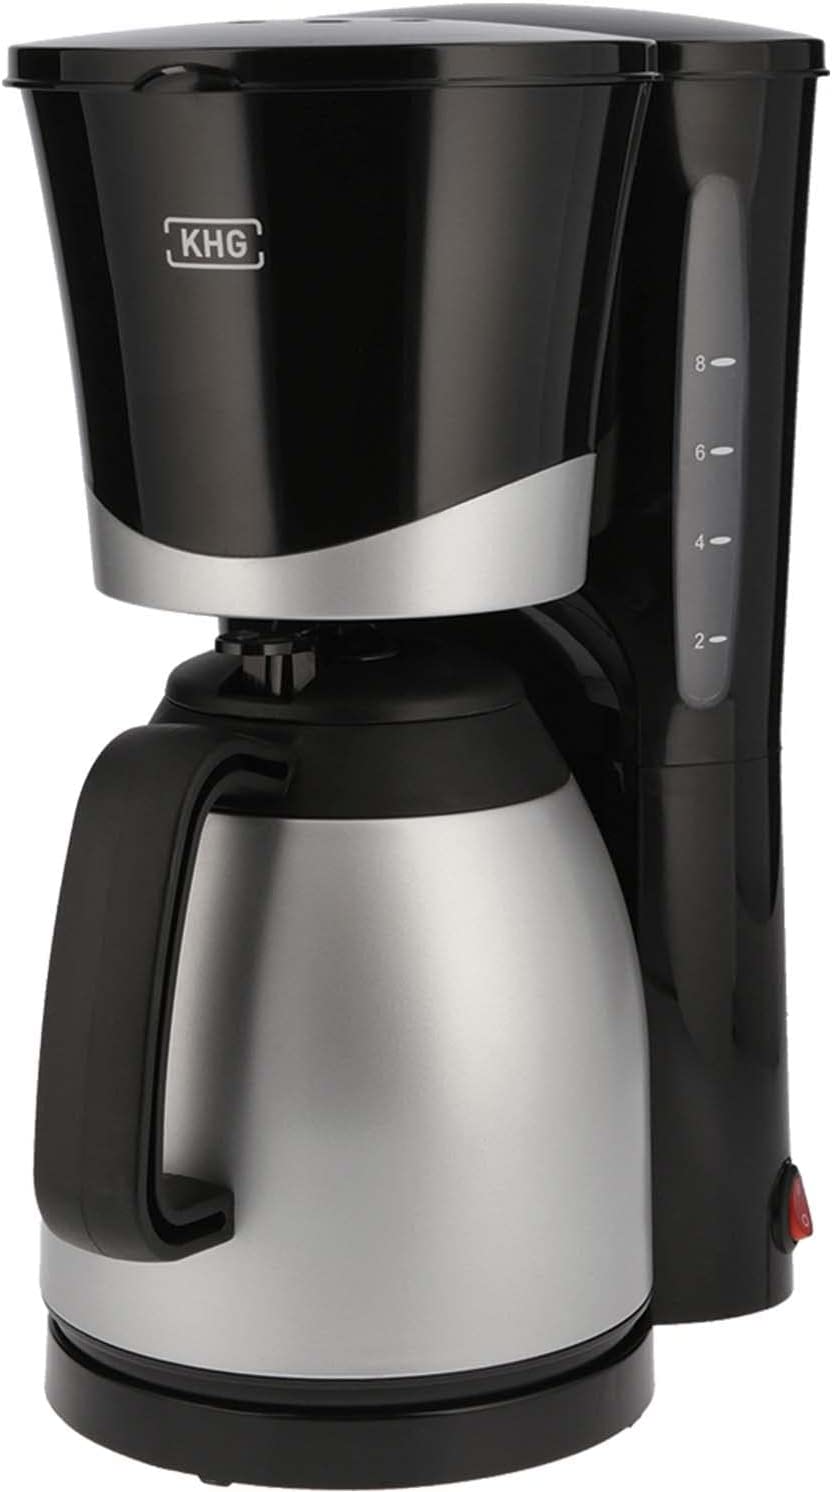 KHG TKA-101SS Plastic / Metal Coffee Machine in Black / Silver With Thermos Flask 1 Litre Capacity for 8 Cups Removable Permanent Filter Water Level Indicator Drip Stop